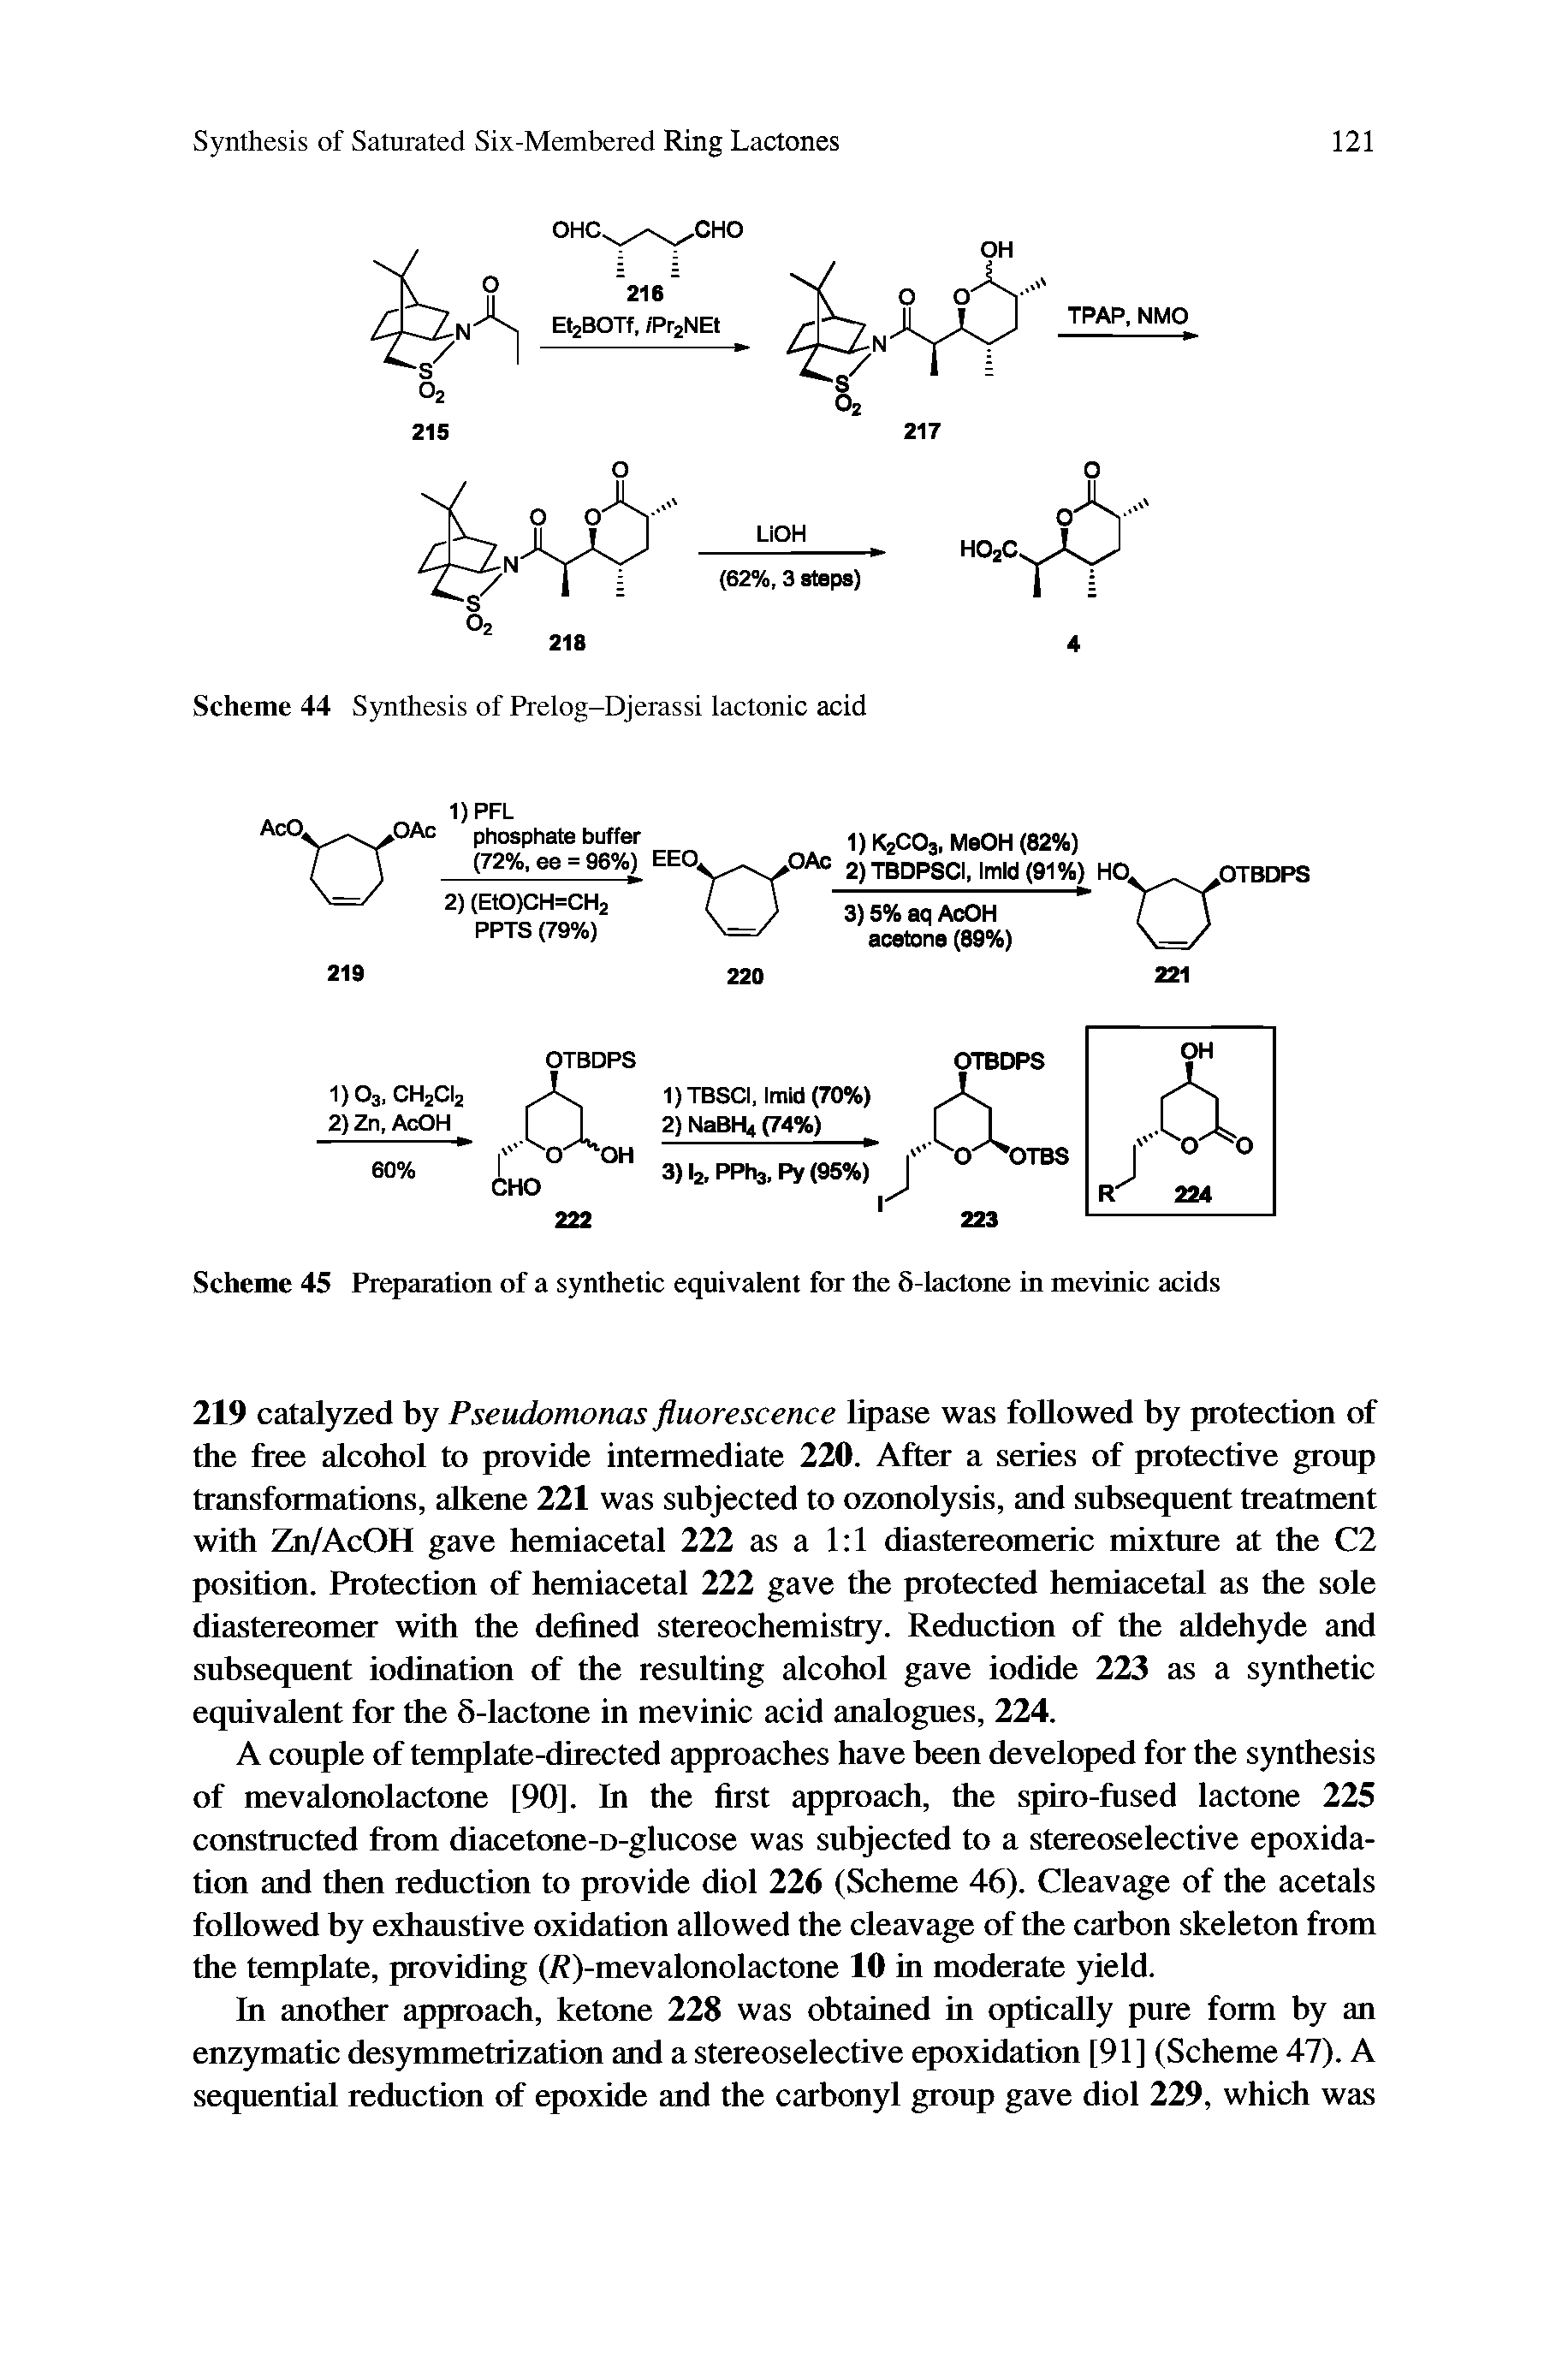 Scheme 45 Preparation of a synthetic equivalent for the 5-lactone in mevinic acids...